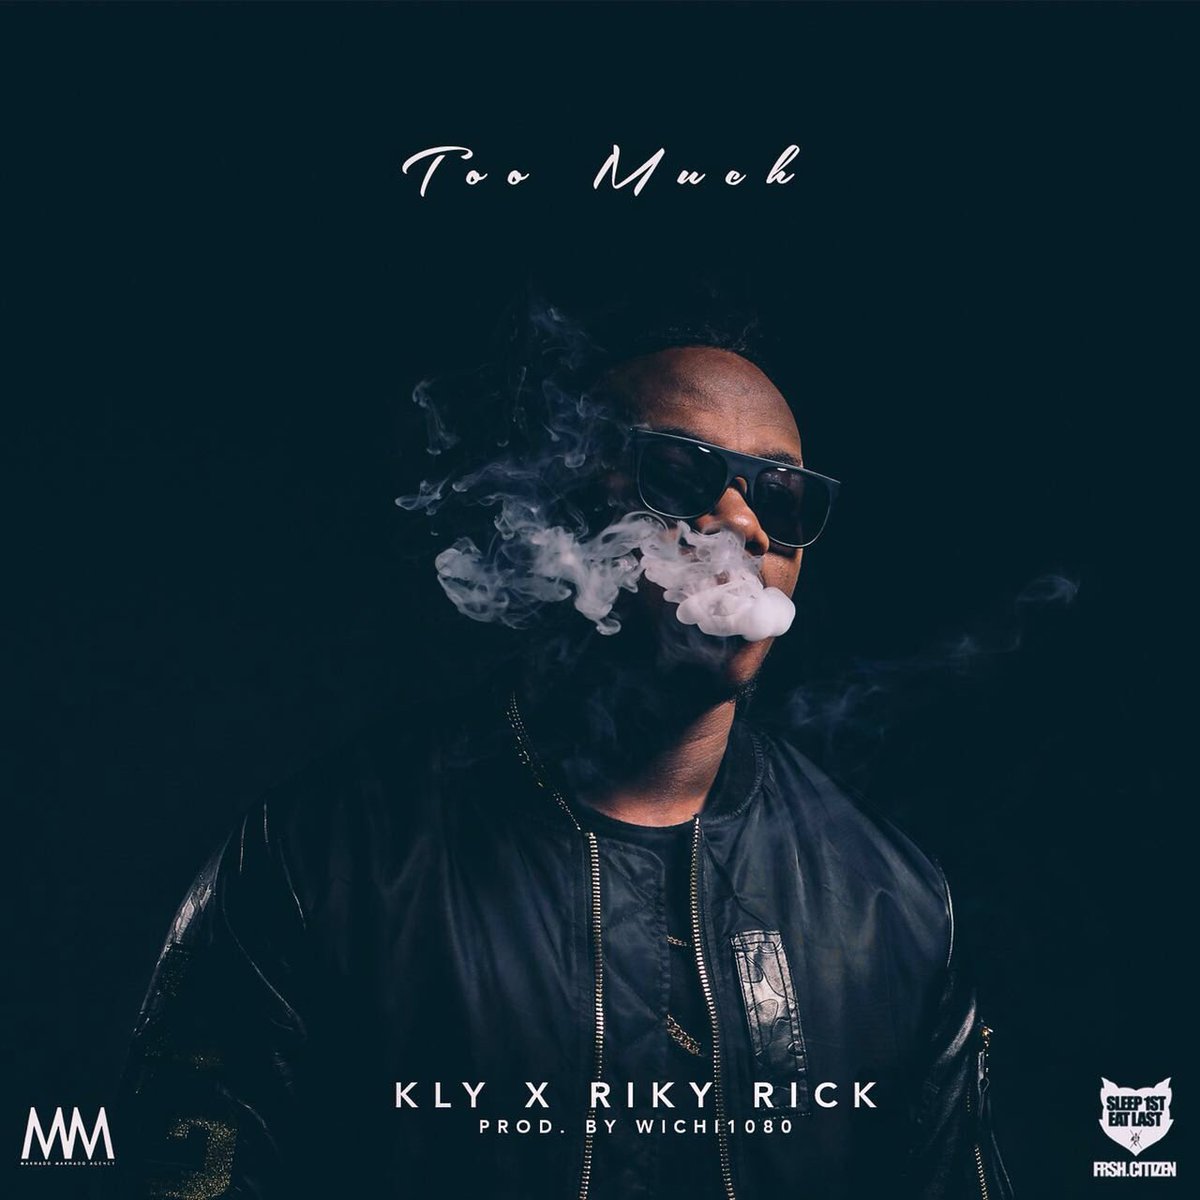 Check Out Kly And Riky Rick's Lit 'Too Much' Video Teaser